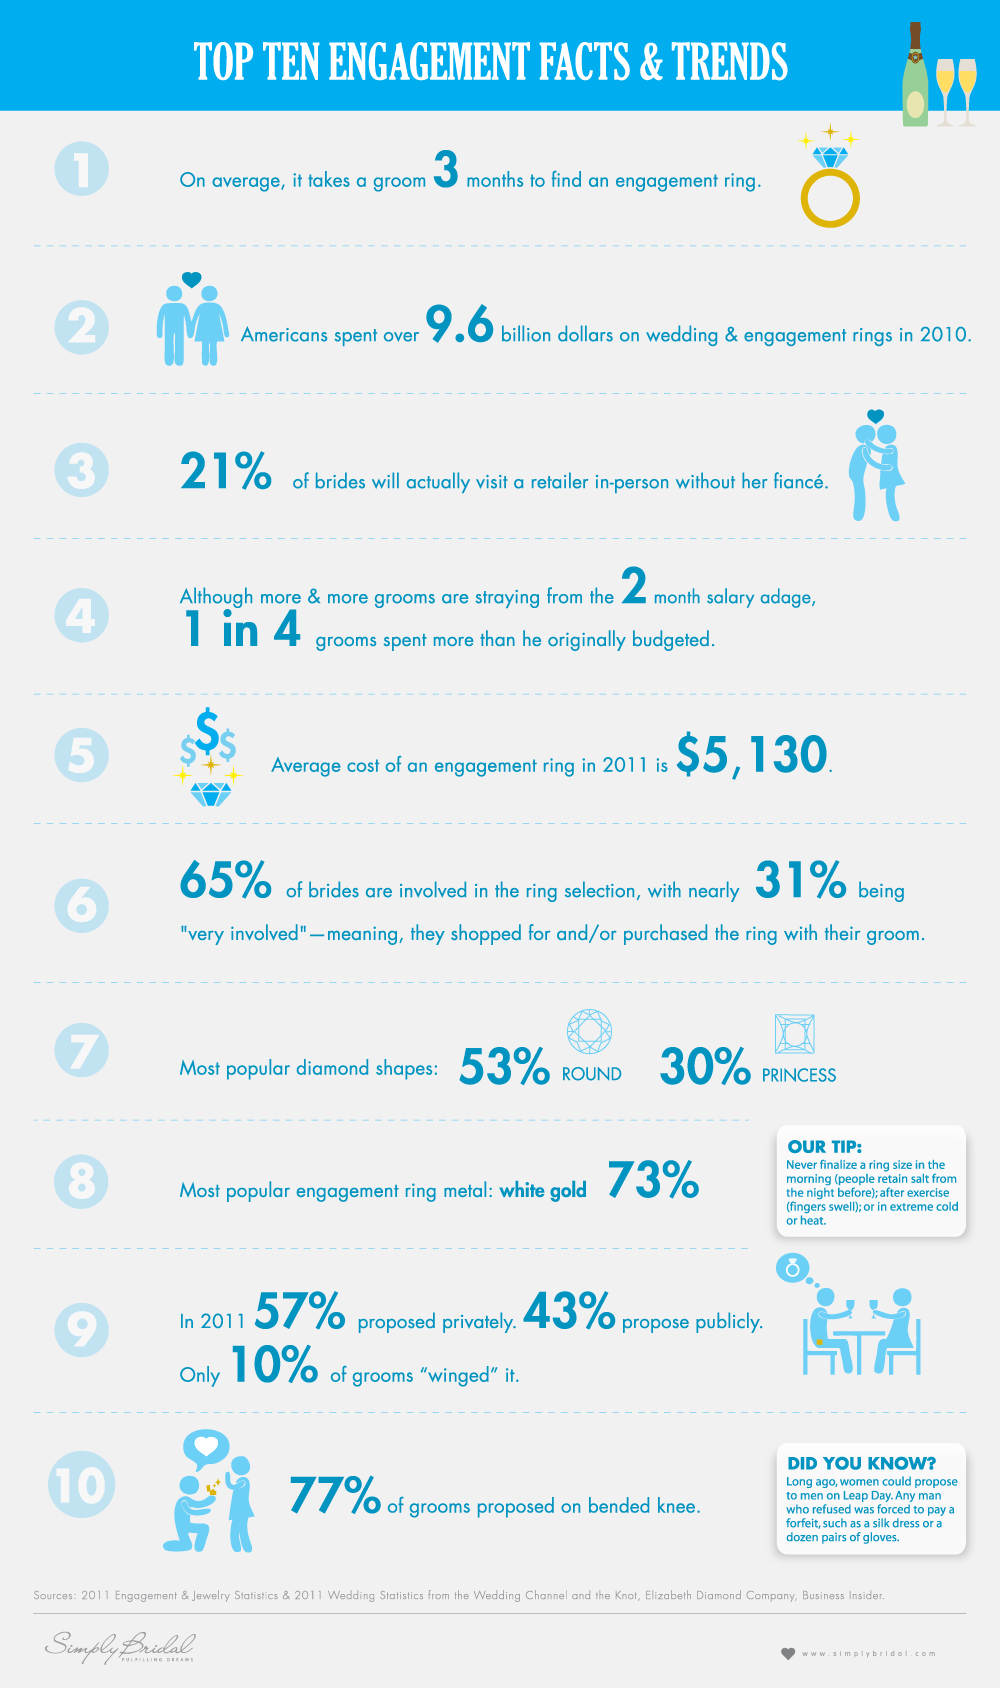 Top 10 Engagment Facts and Trends Infographic